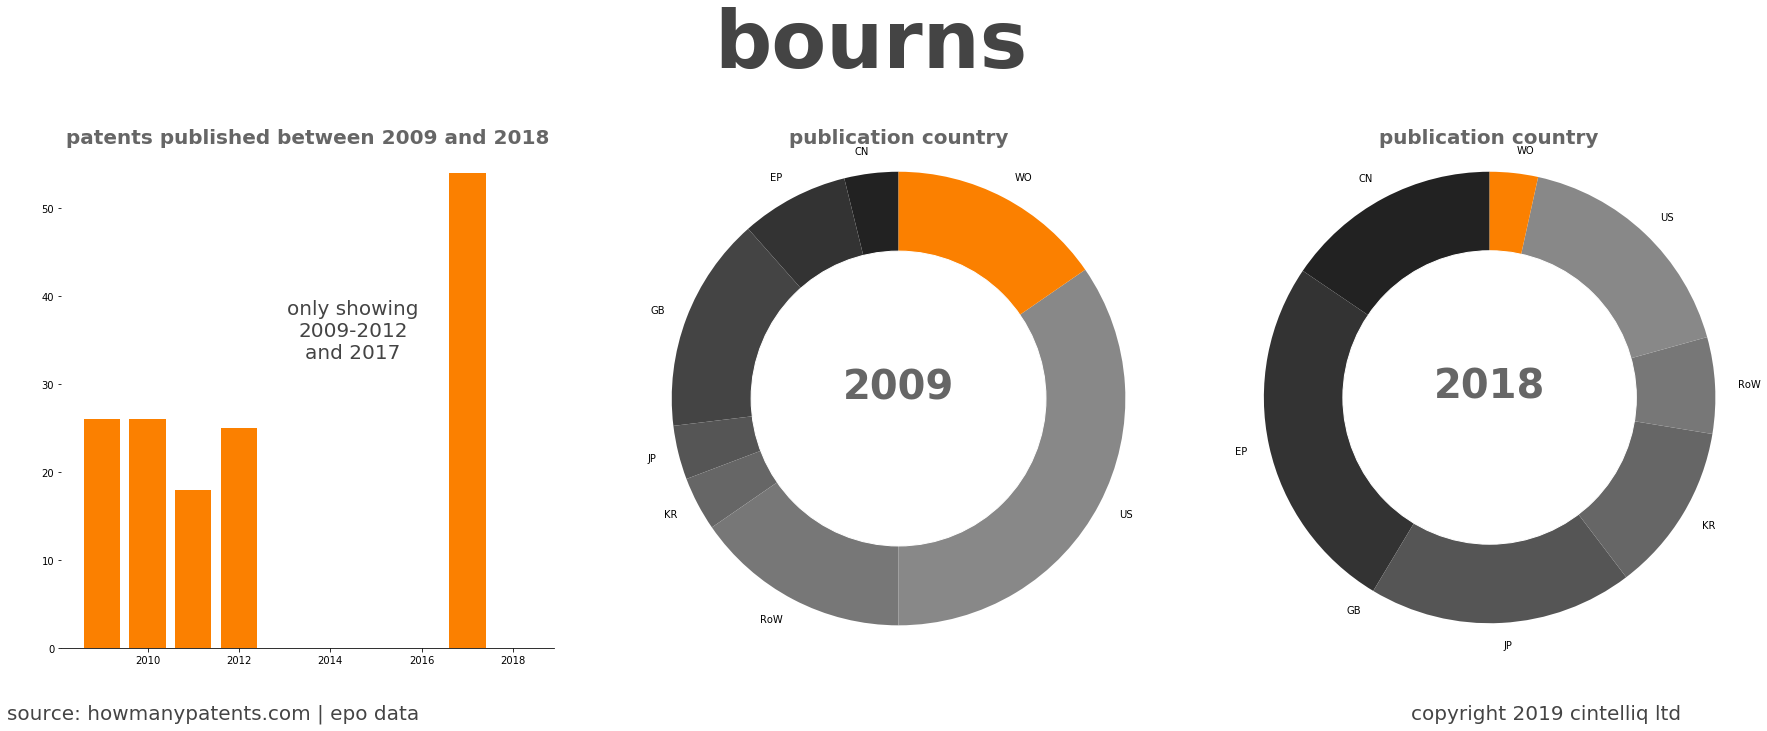 summary of patents for Bourns